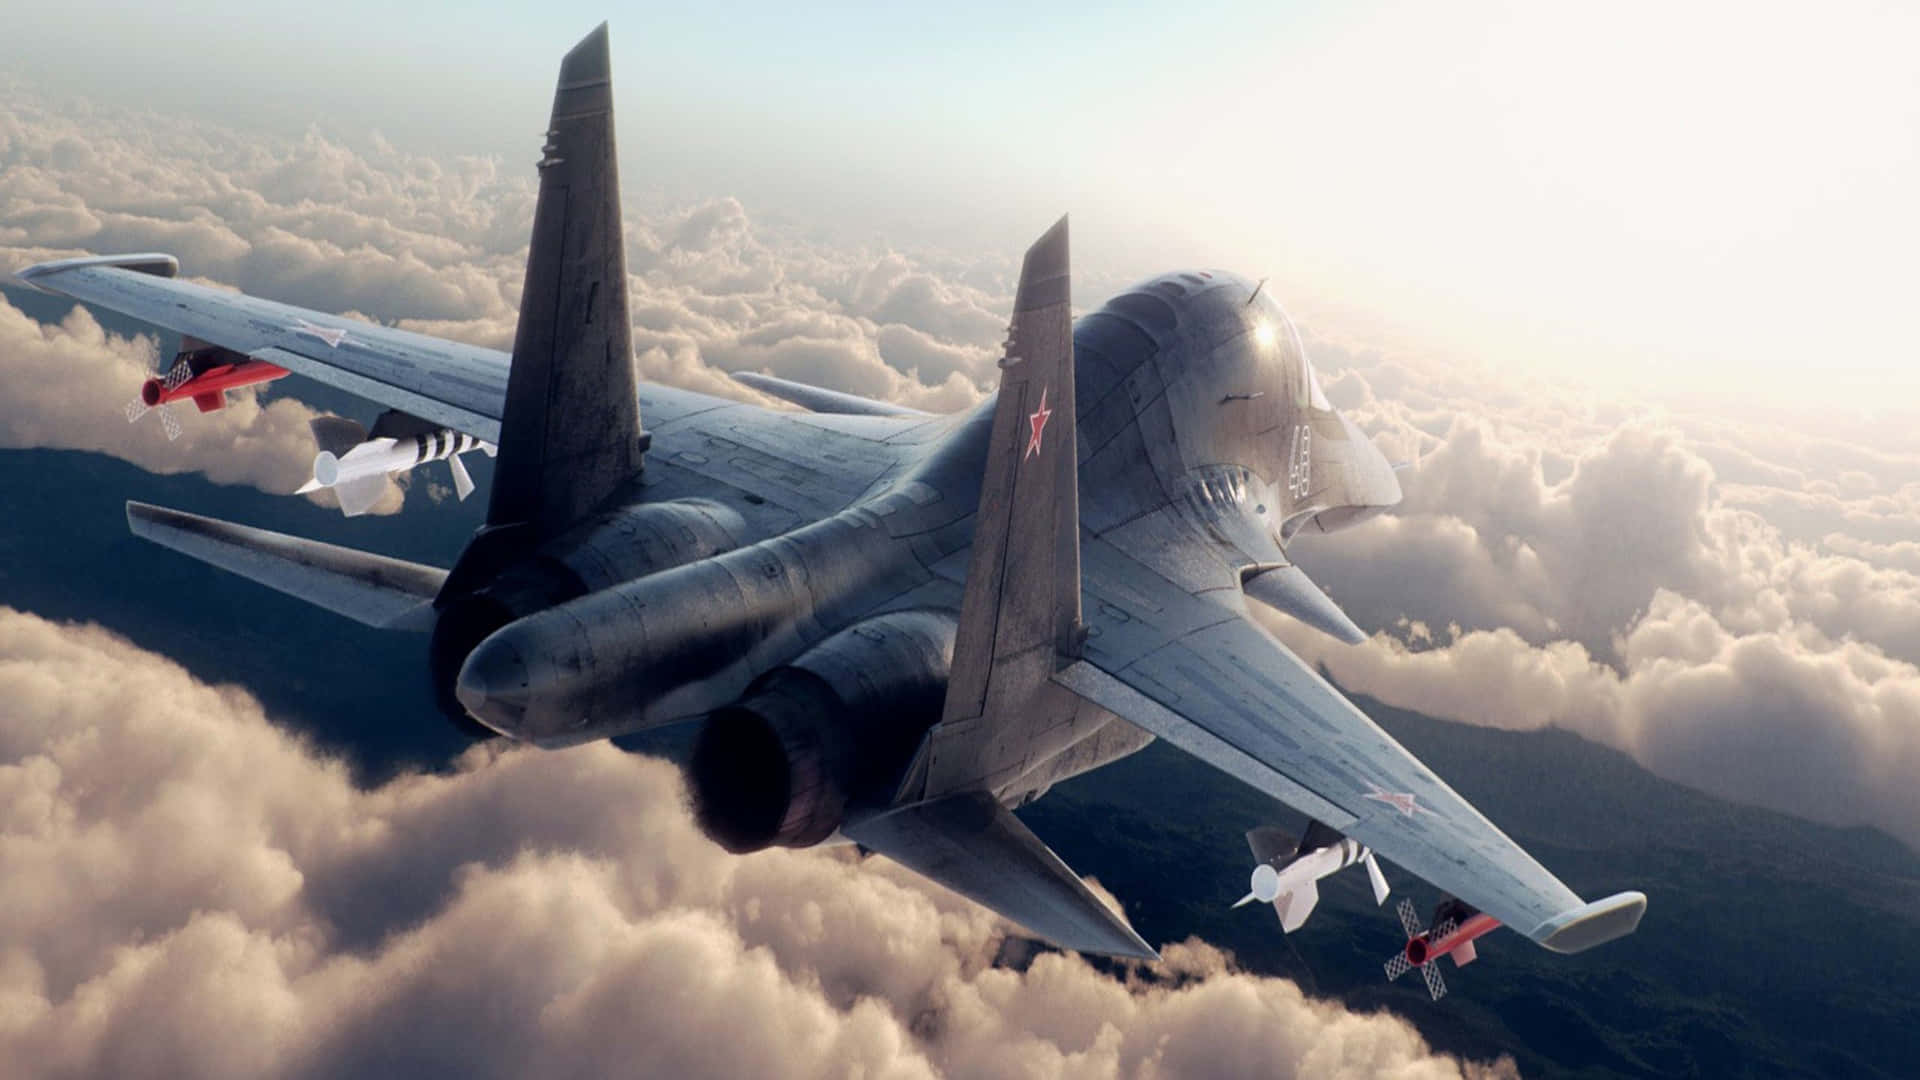 A Fighter Jet Flying Through The Clouds Wallpaper